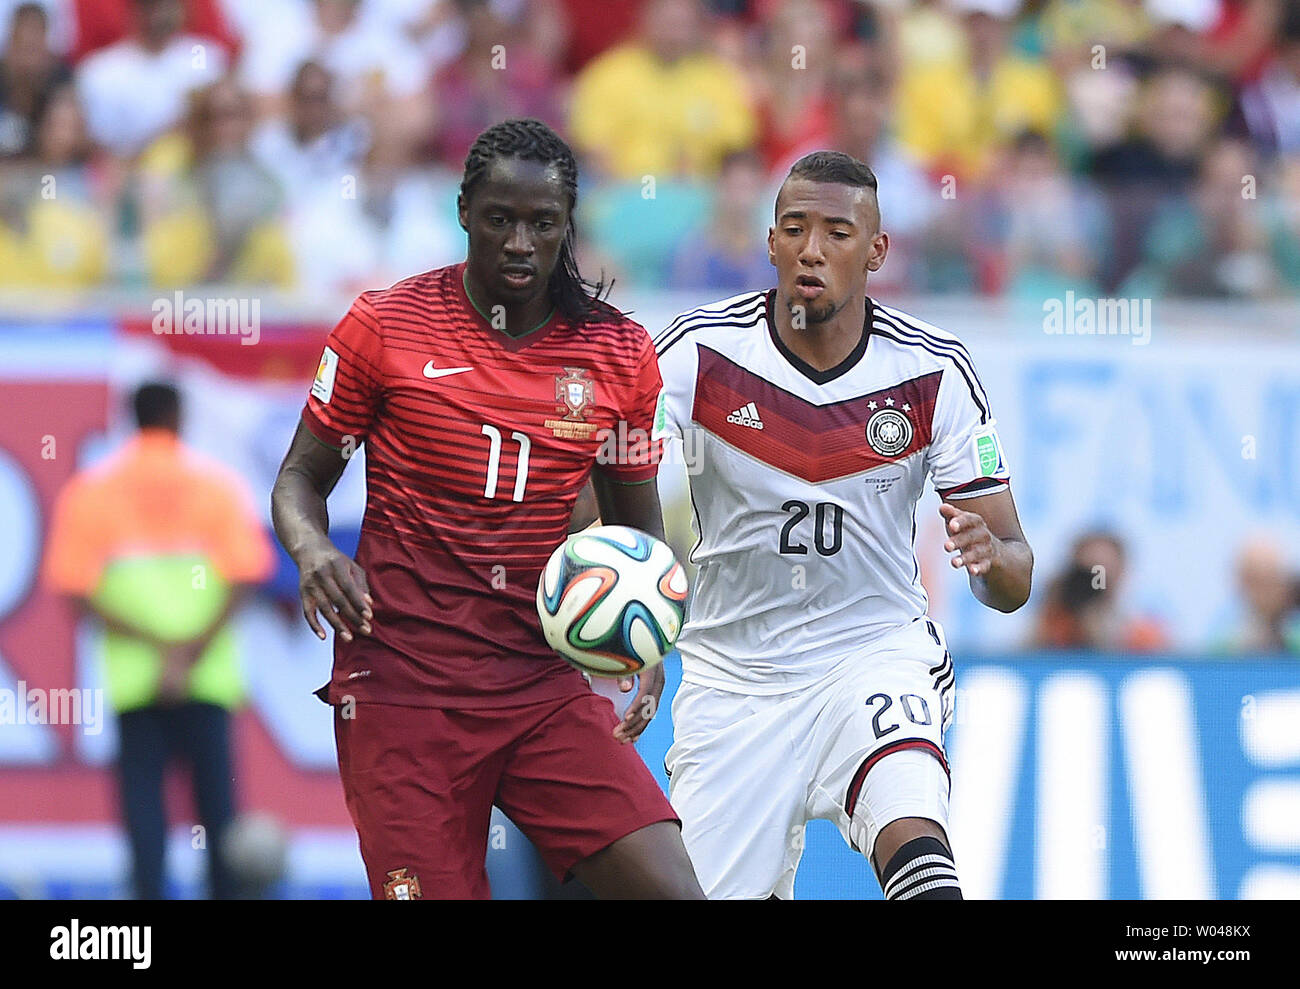 Jerome Boateng of Germany competes with Eder (L) of Portugal during the 2014 FIFA World Cup Group G match at the Arena Fonte Nova in Salvador, Brazil on June 16, 2014. UPI/Chris Brunskill Stock Photo